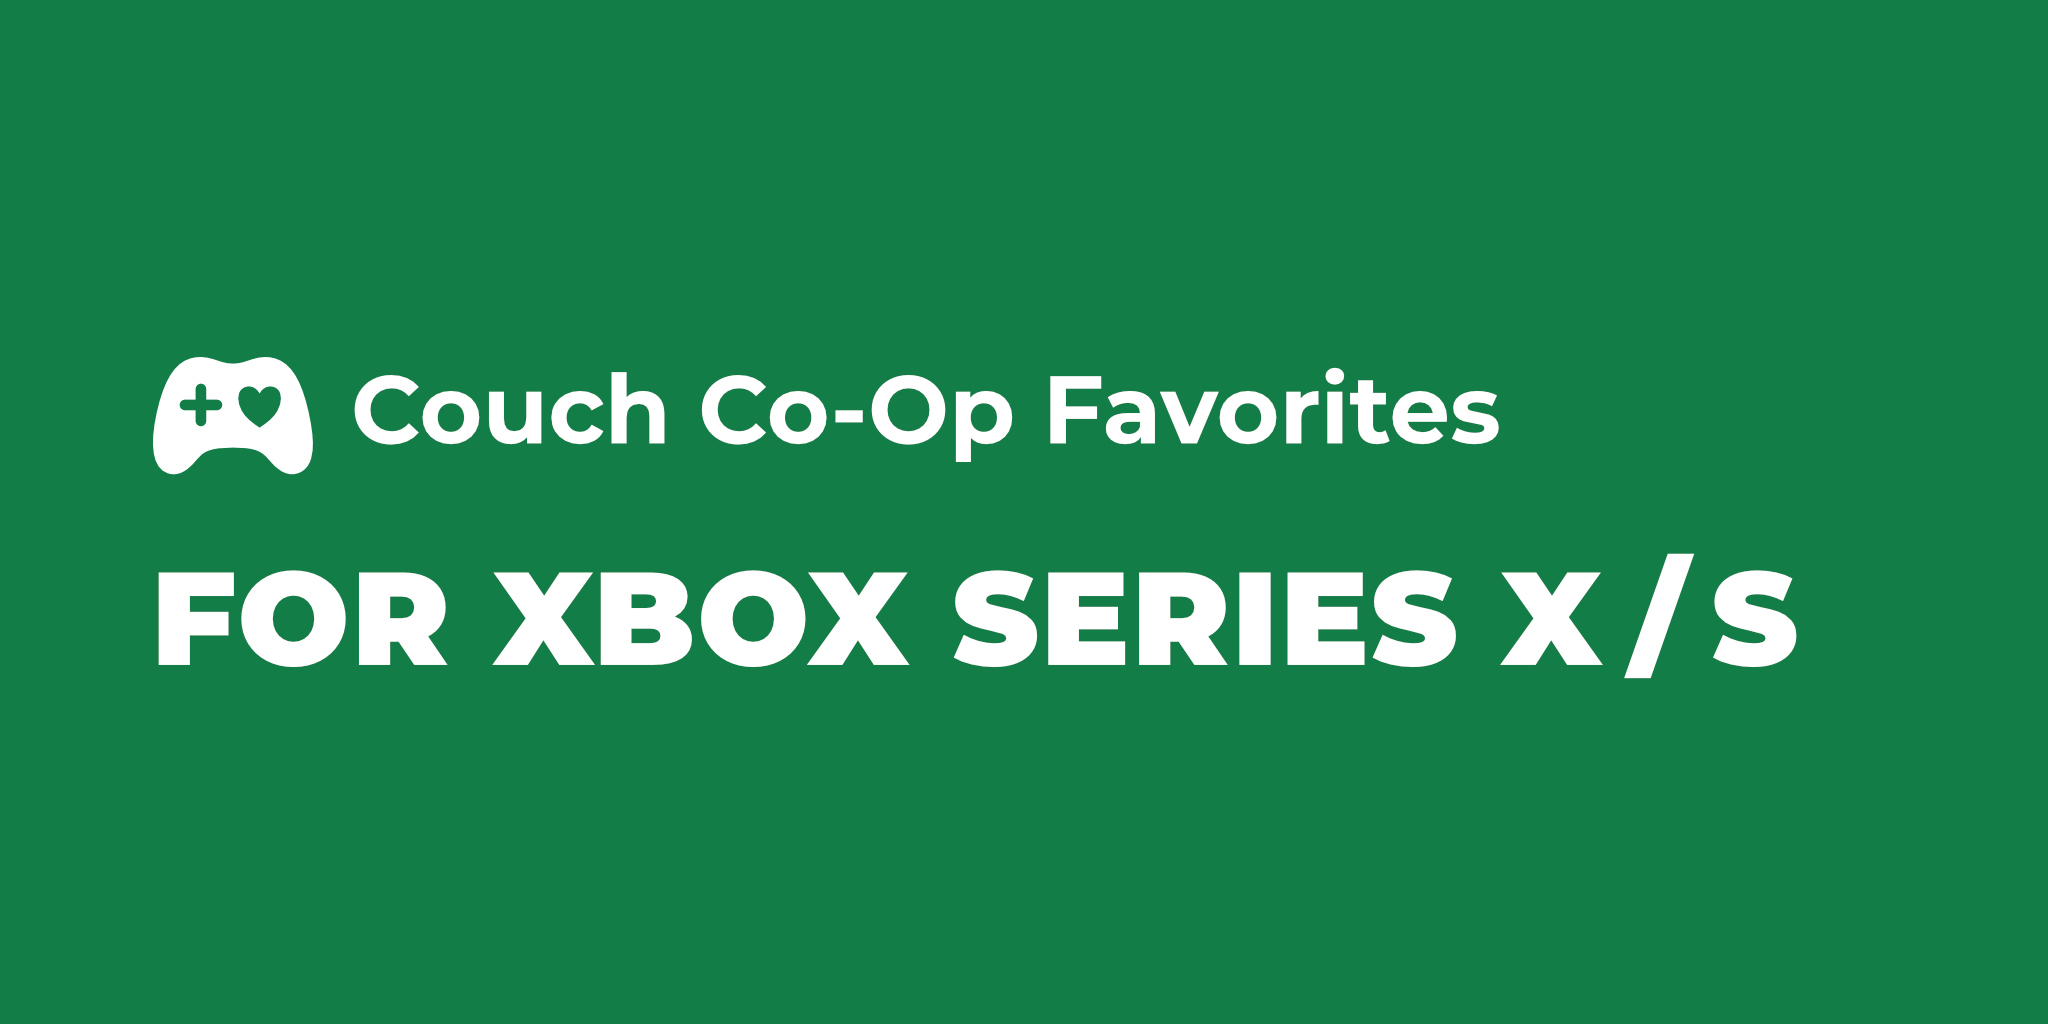 The 16 Best Couch Co-Op Games for Xbox Series X/S